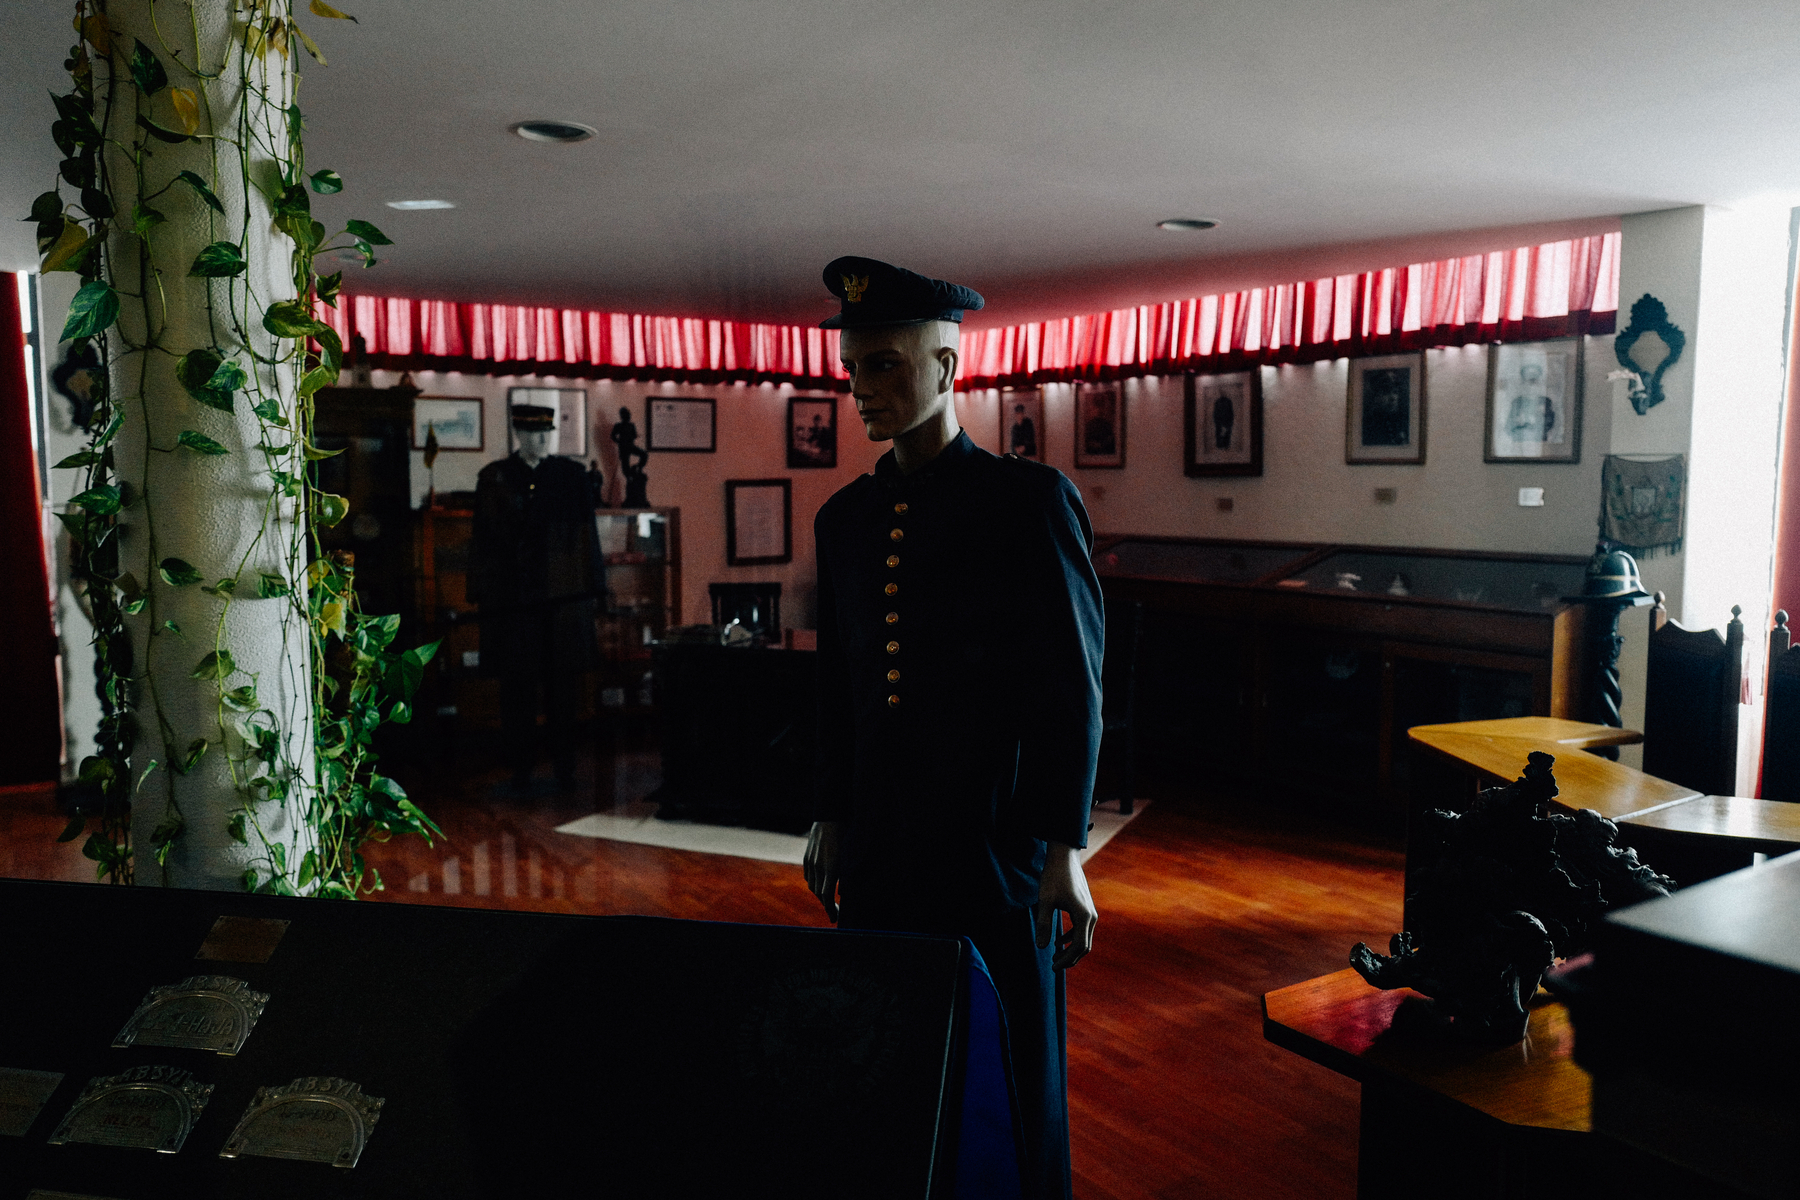 A dimly lit room displaying firemen memorabilia, with a mannequin dressed in a formal uniform at the center, flanked by showcases and framed items on the walls.